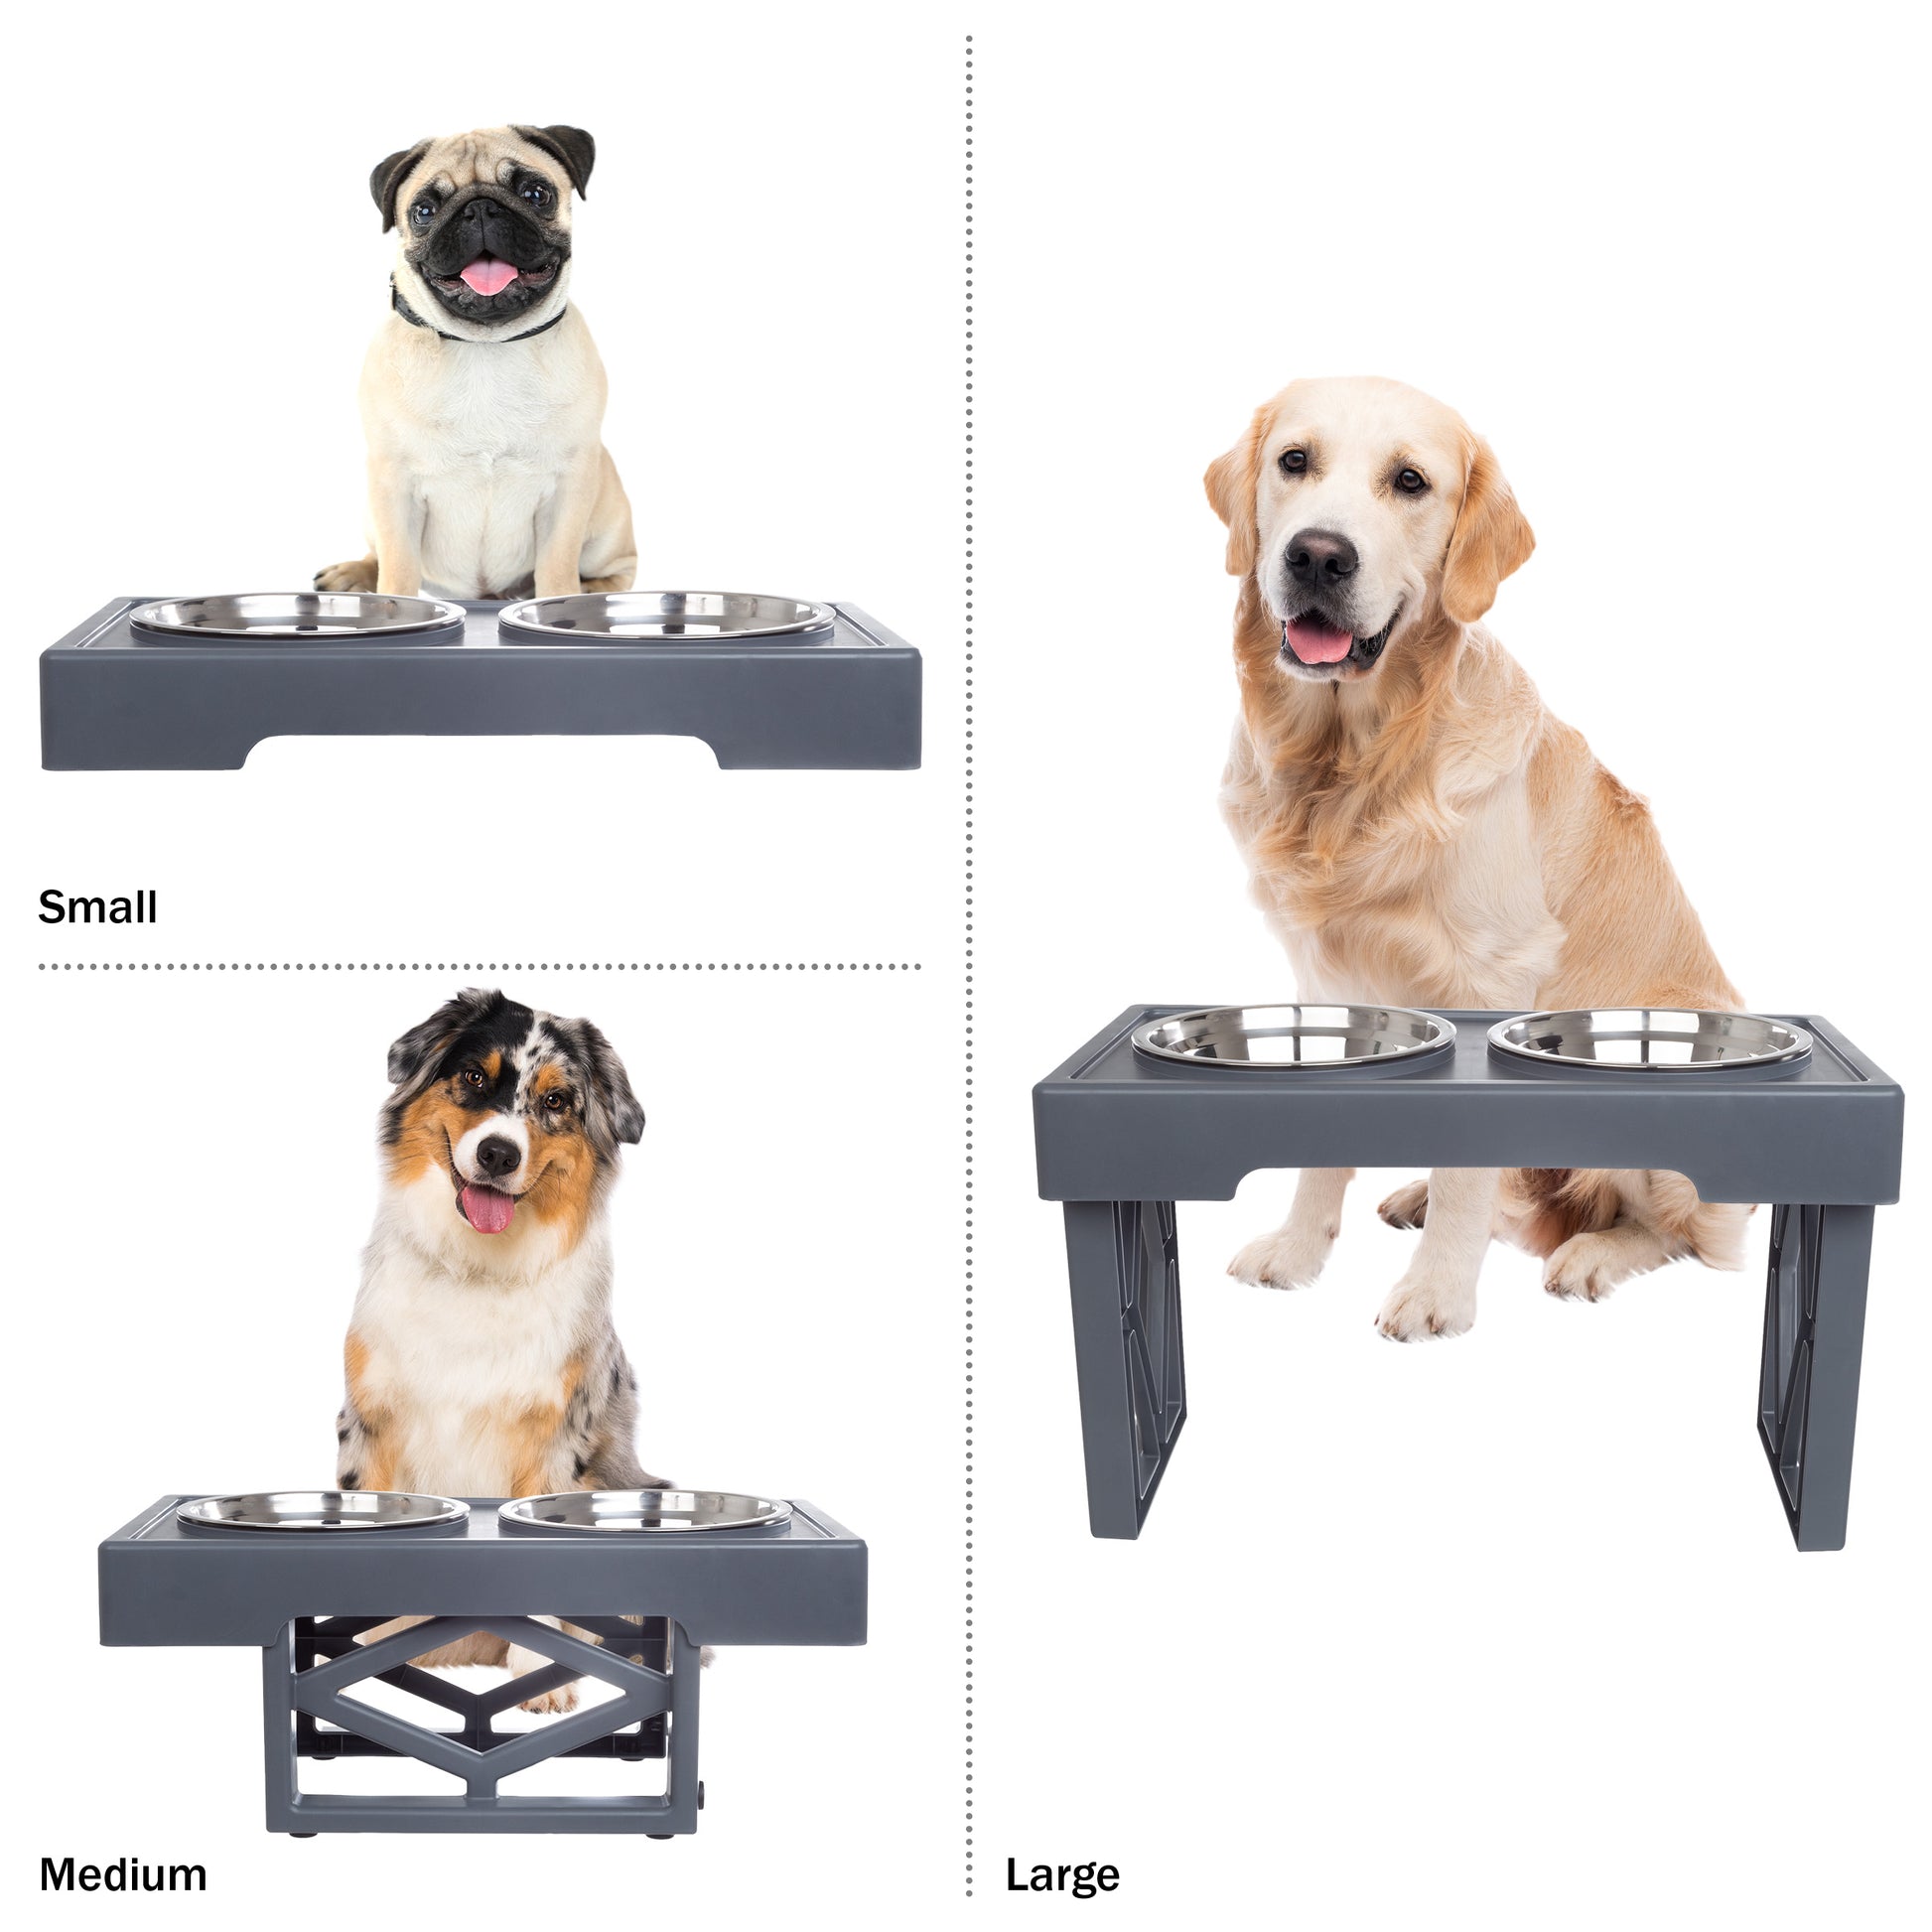 Elevated Dog Bowls for Large Dogs, 4 Adjustable Heights Raised Pet Bowl  Stand US